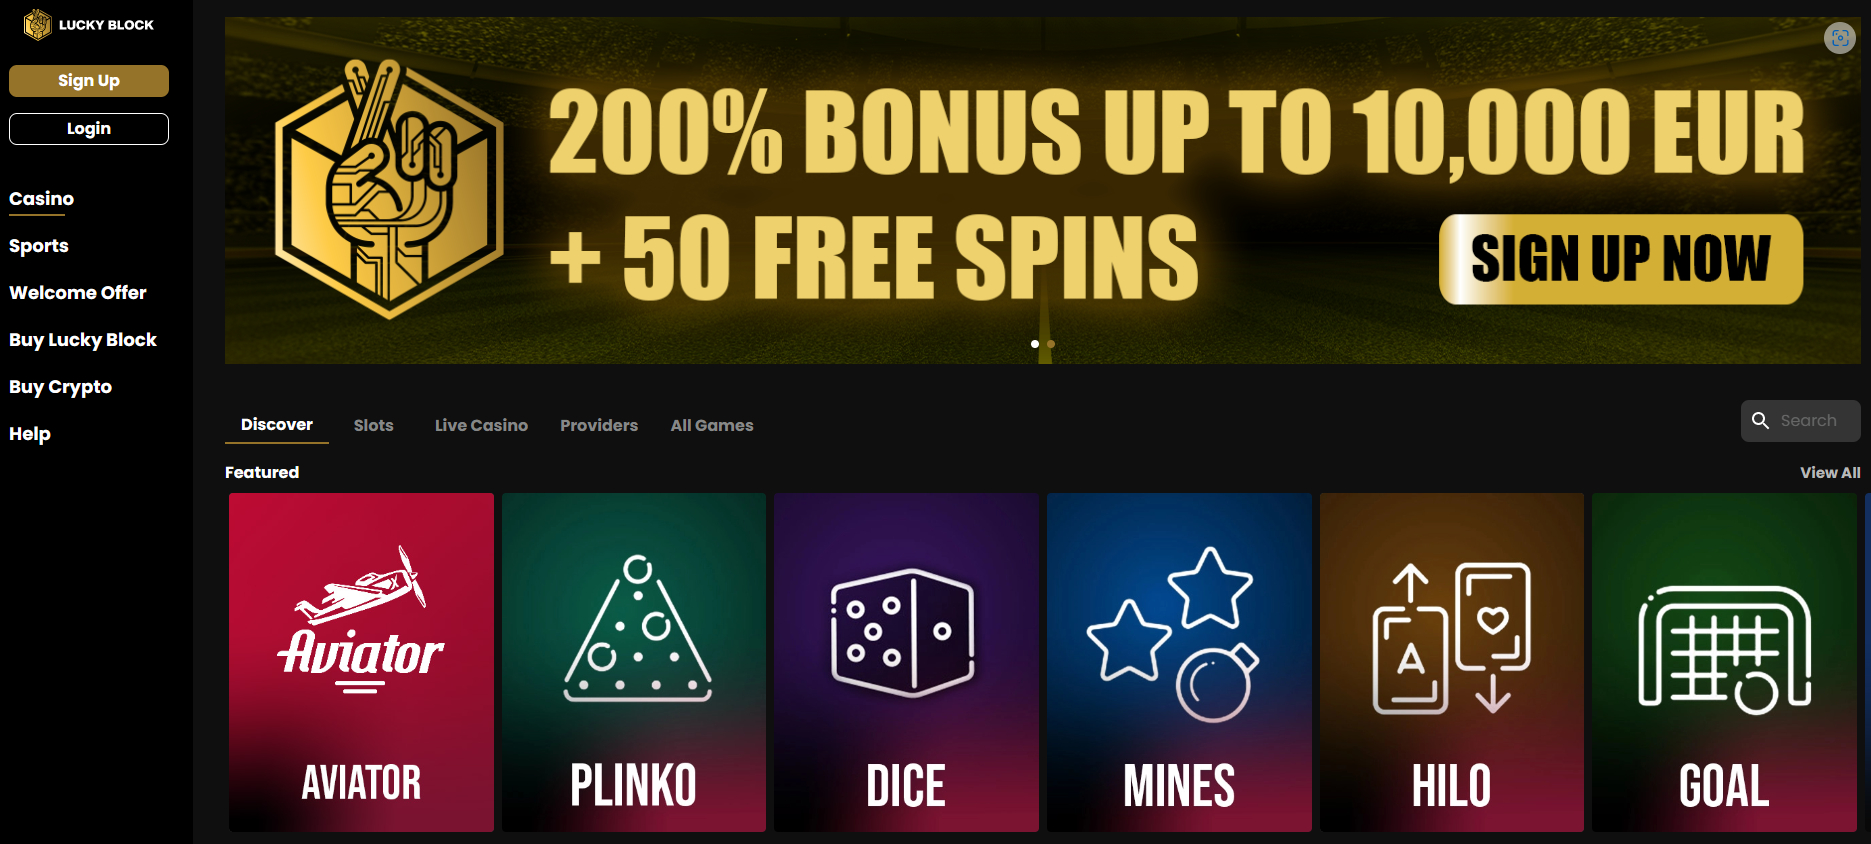 Lucky Block fast payout online casino signup bonus